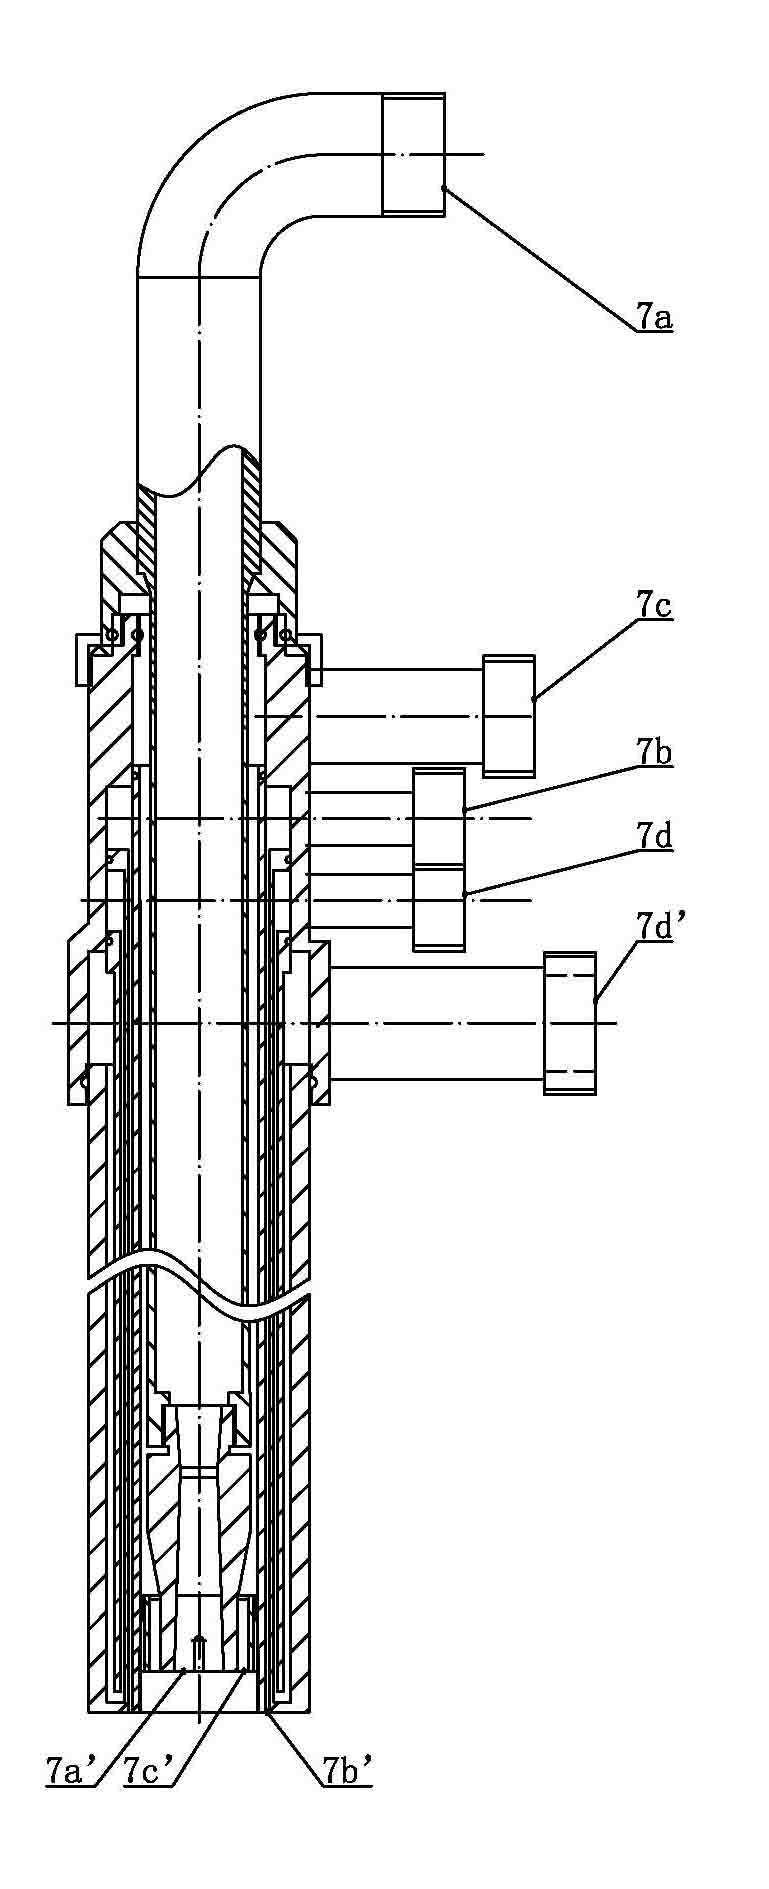 Top oxygen-blowing combustion system for intermediate frequency furnace